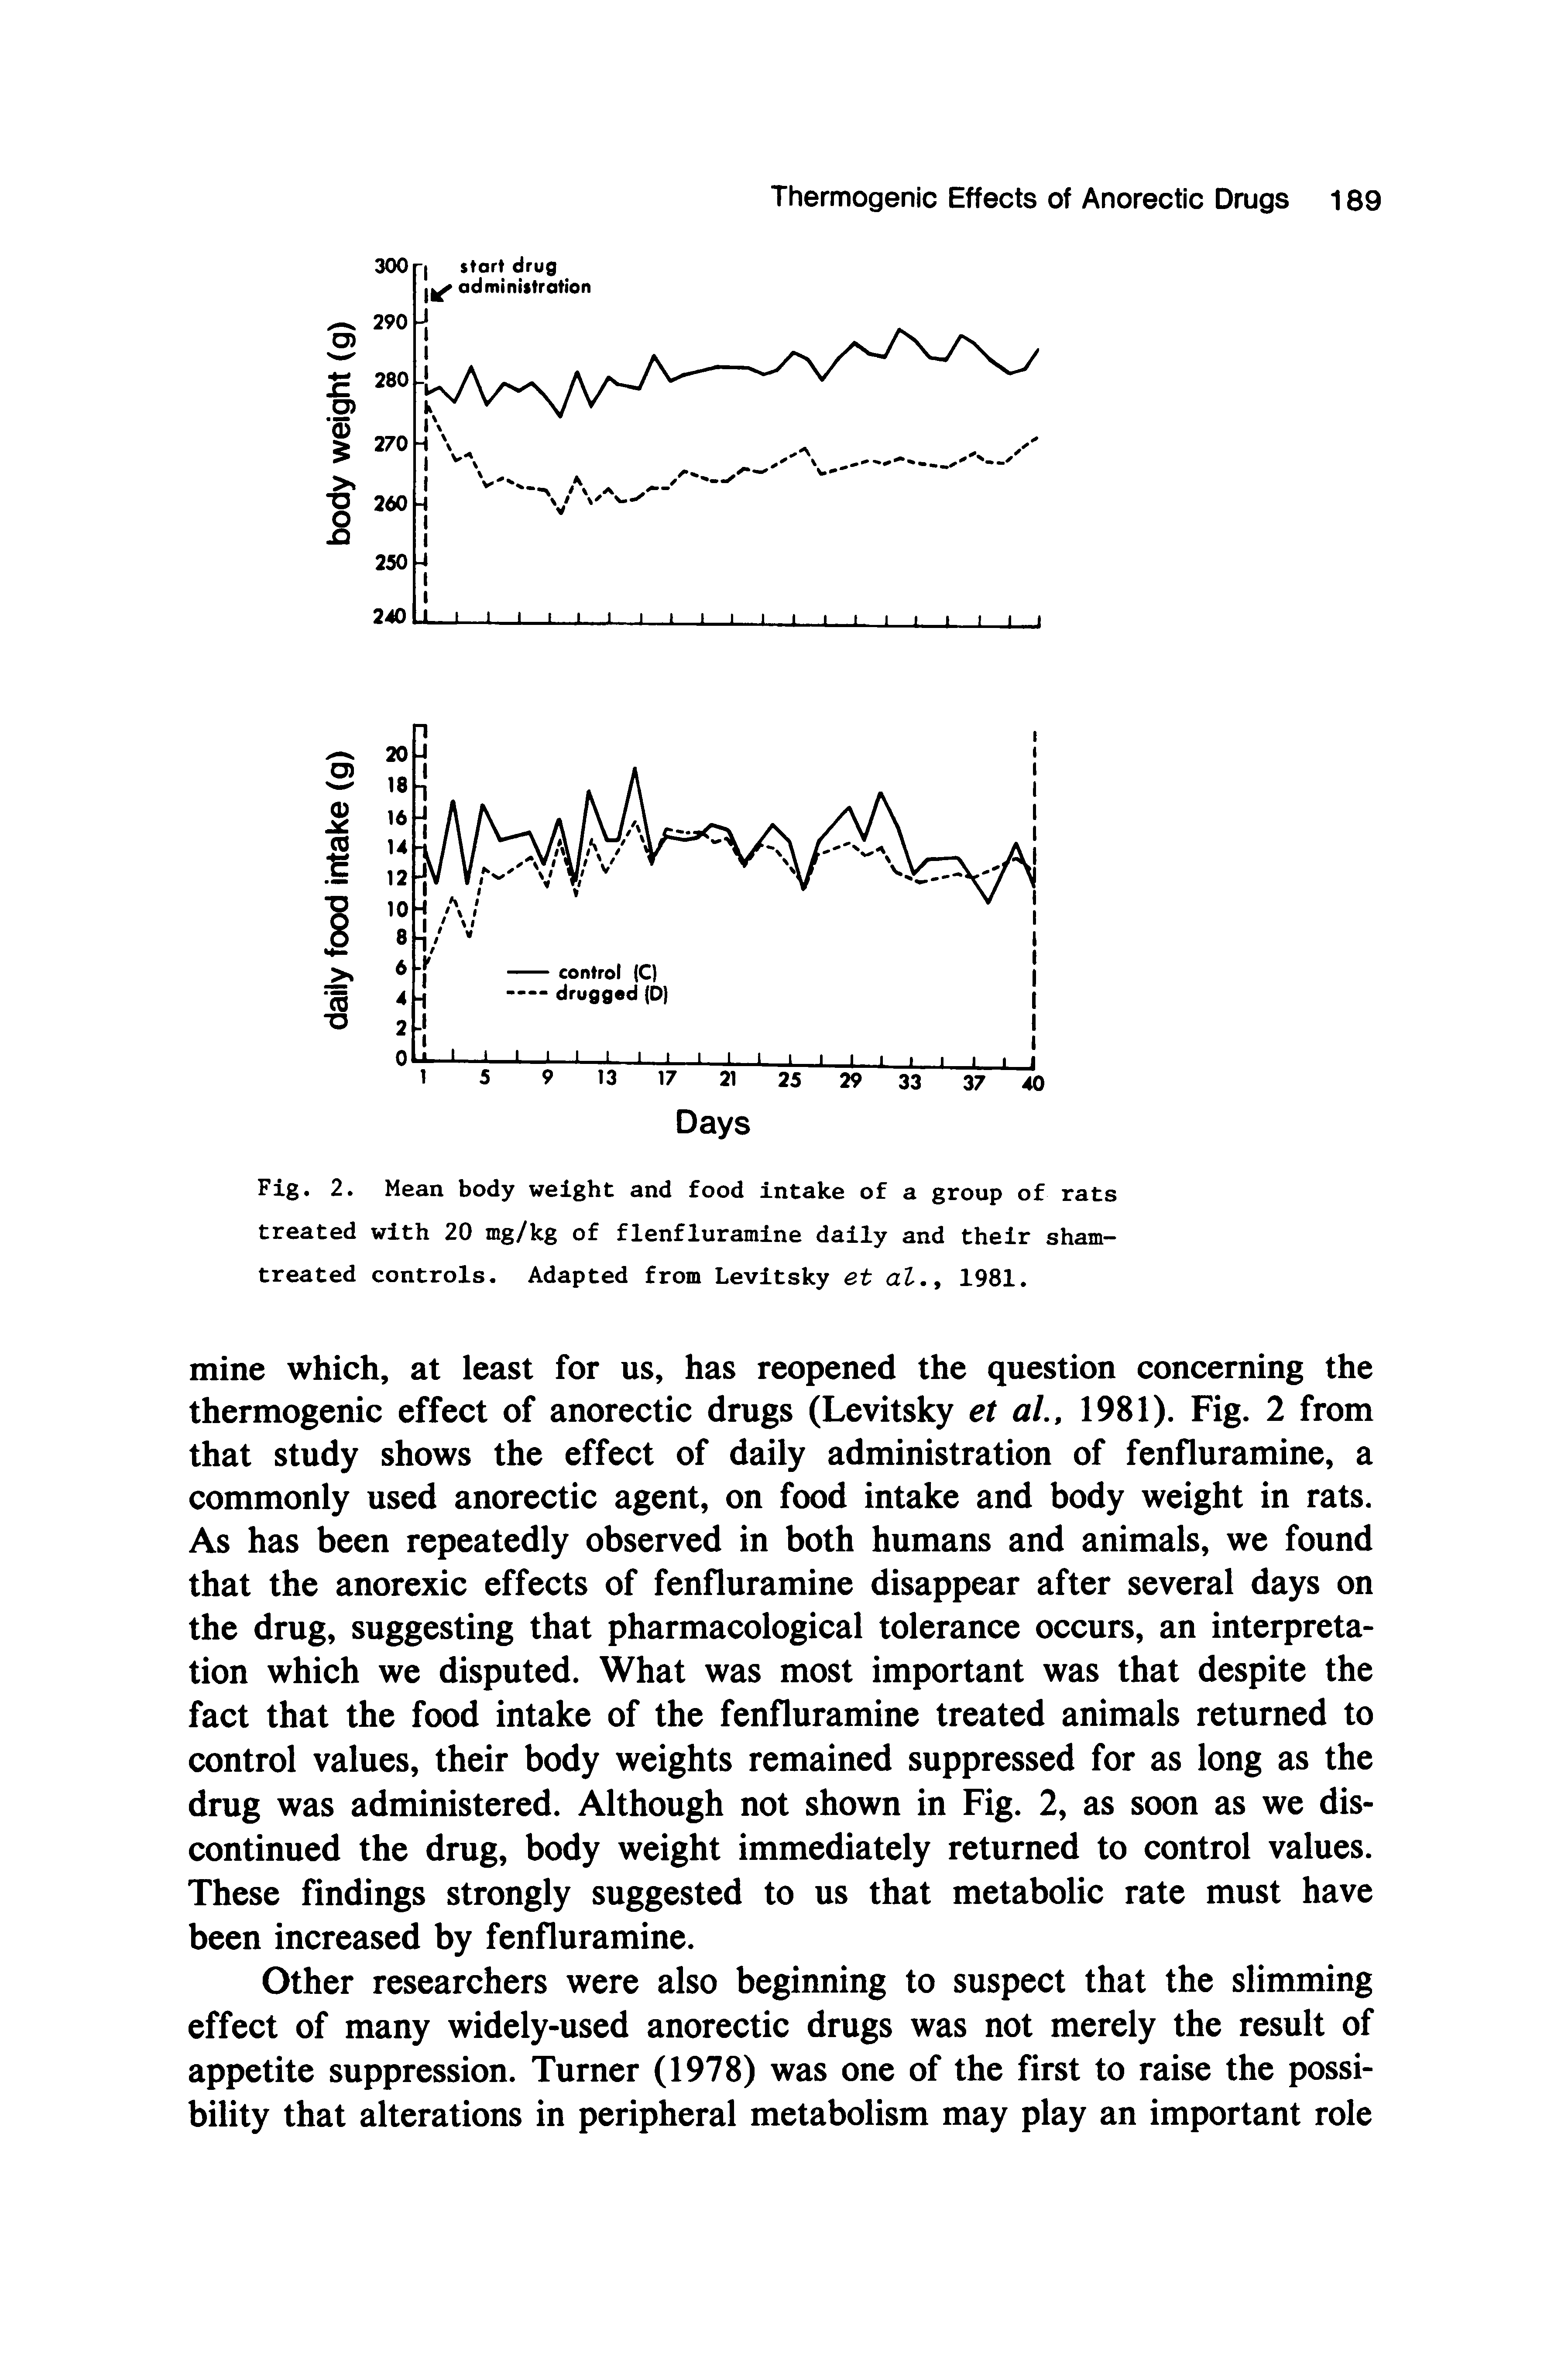 Fig. 2. Mean body weight and food intake of a group of rats treated with 20 mg/kg of flenfluramine daily and their sham-treated controls. Adapted from Levitsky et ai. 1981.